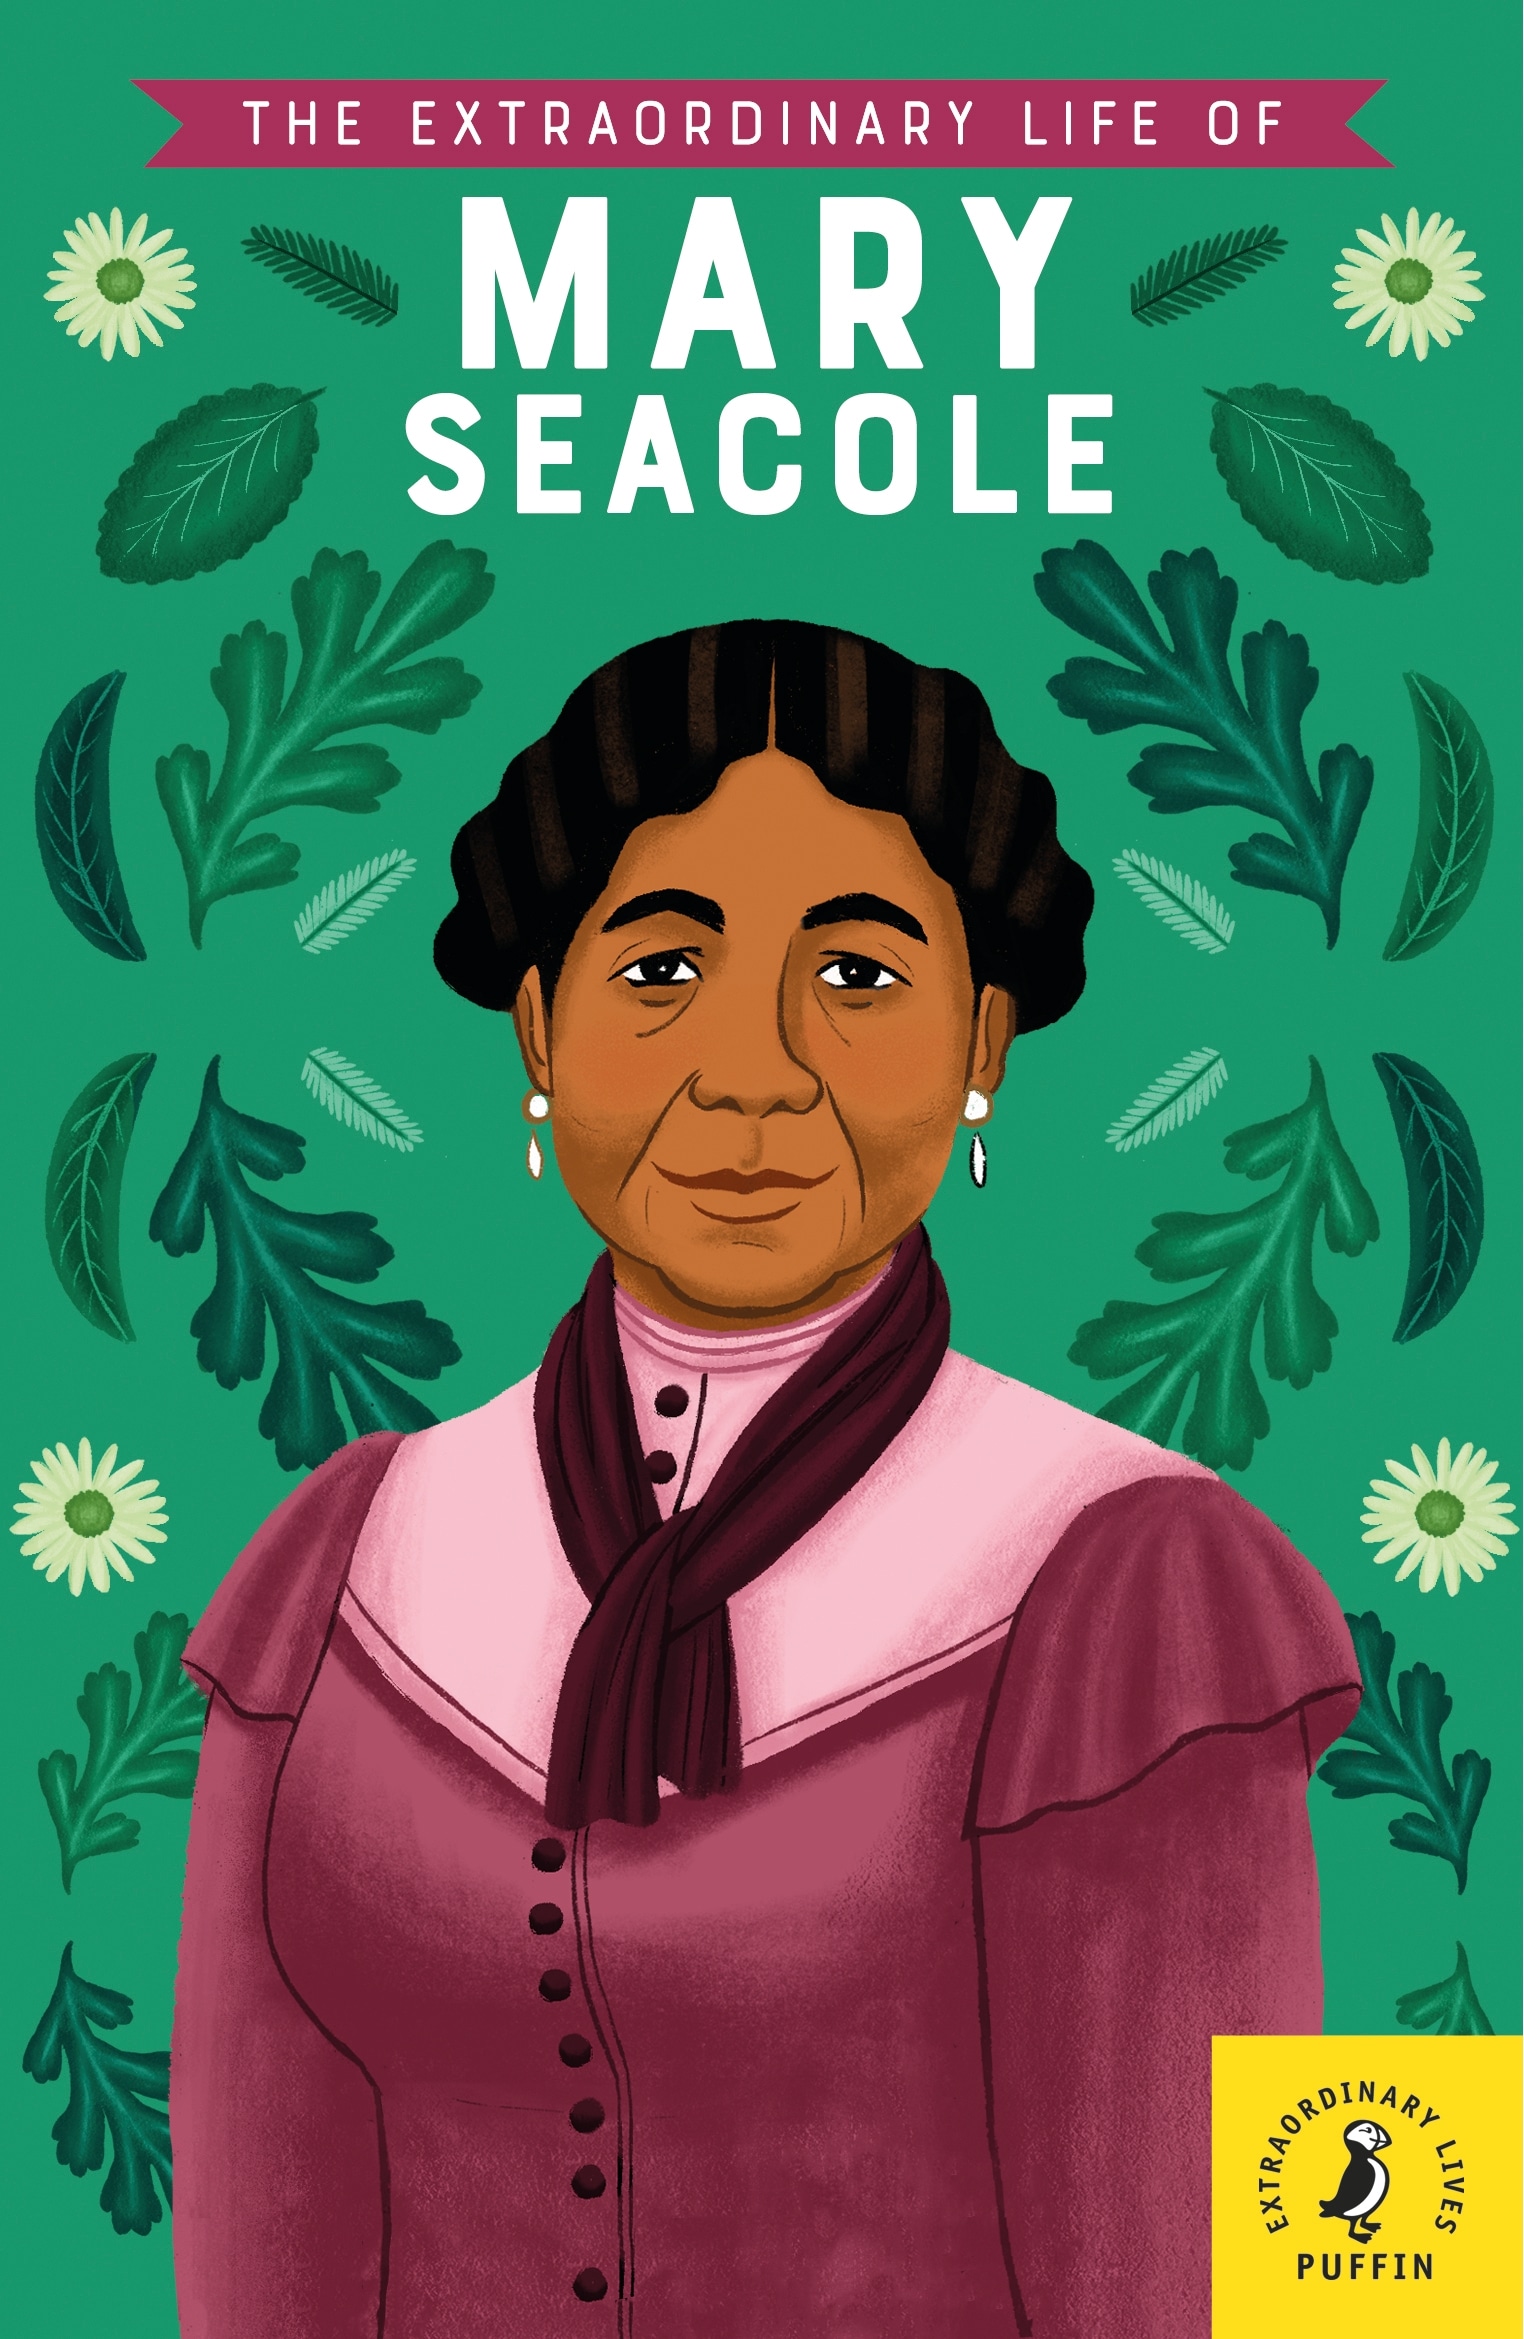 Book “The Extraordinary Life of Mary Seacole” by Naida Redgrave — September 5, 2019